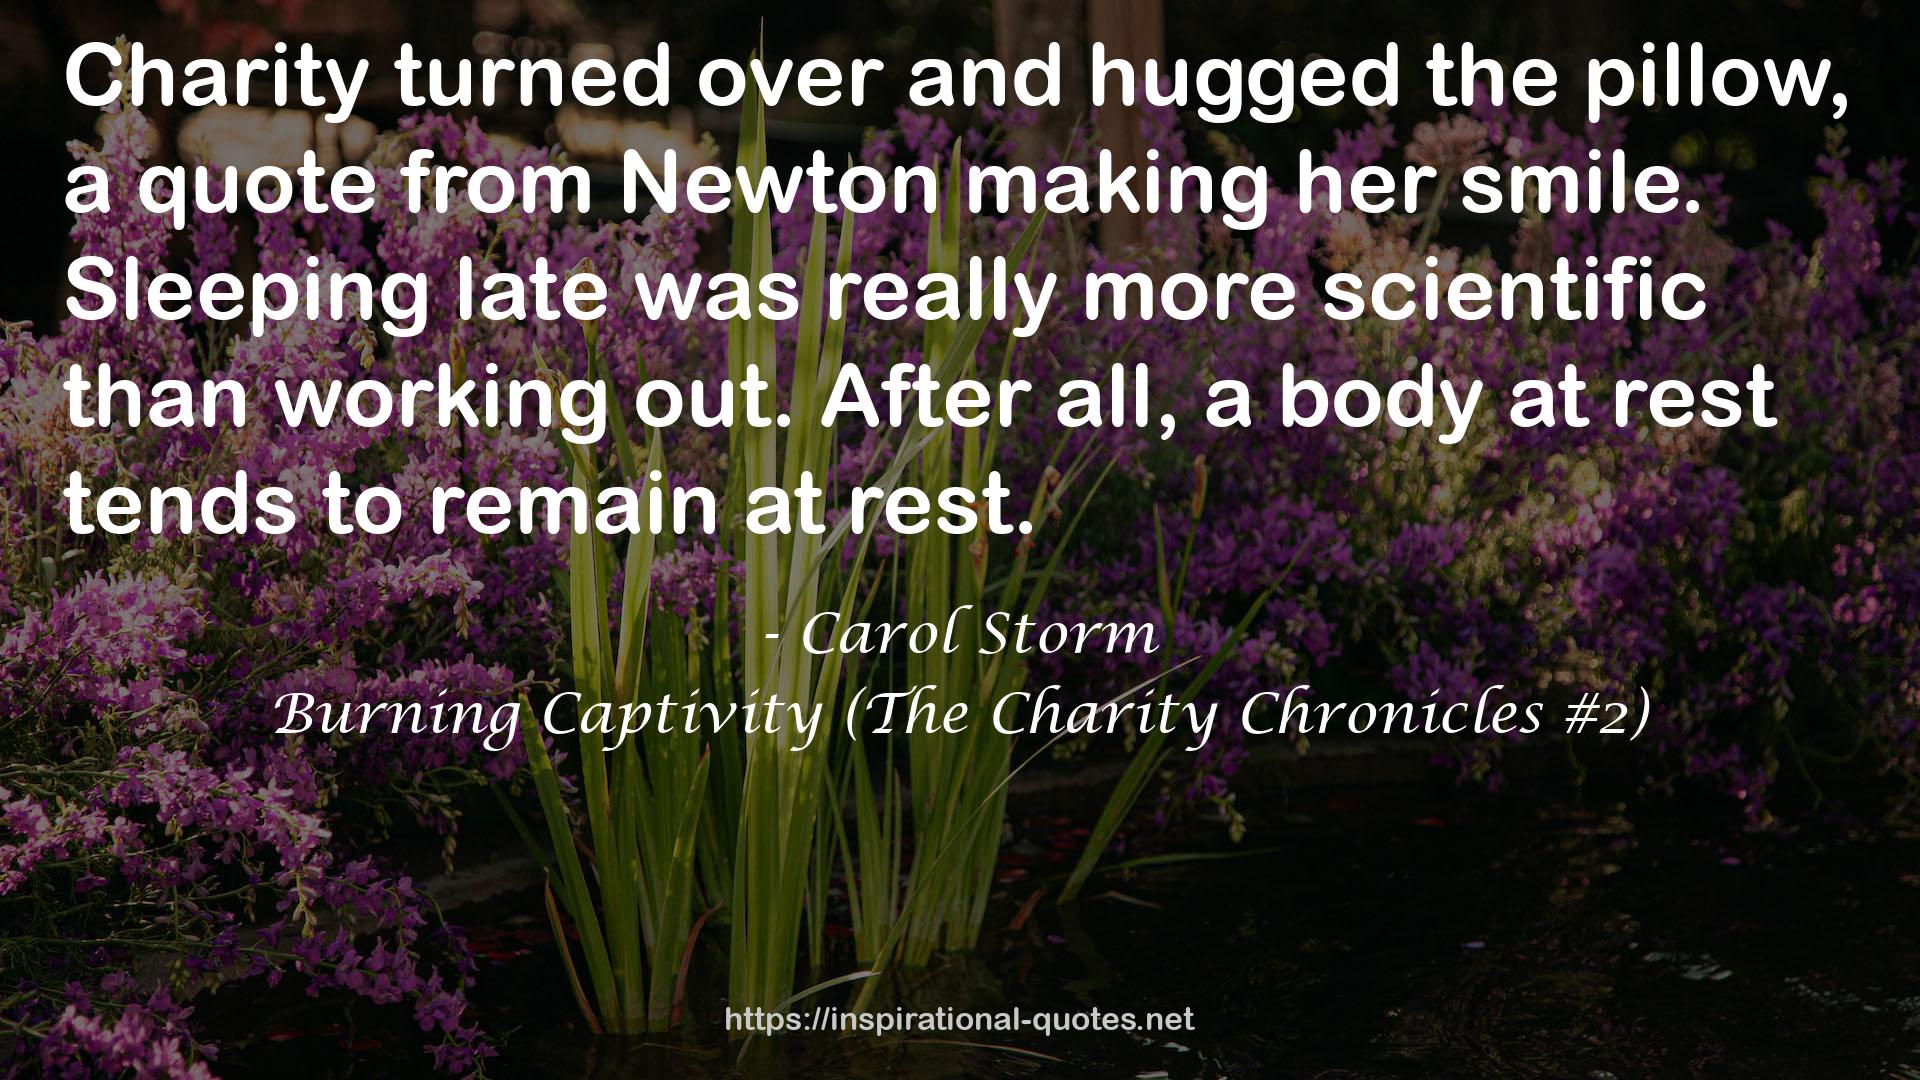 Burning Captivity (The Charity Chronicles #2) QUOTES